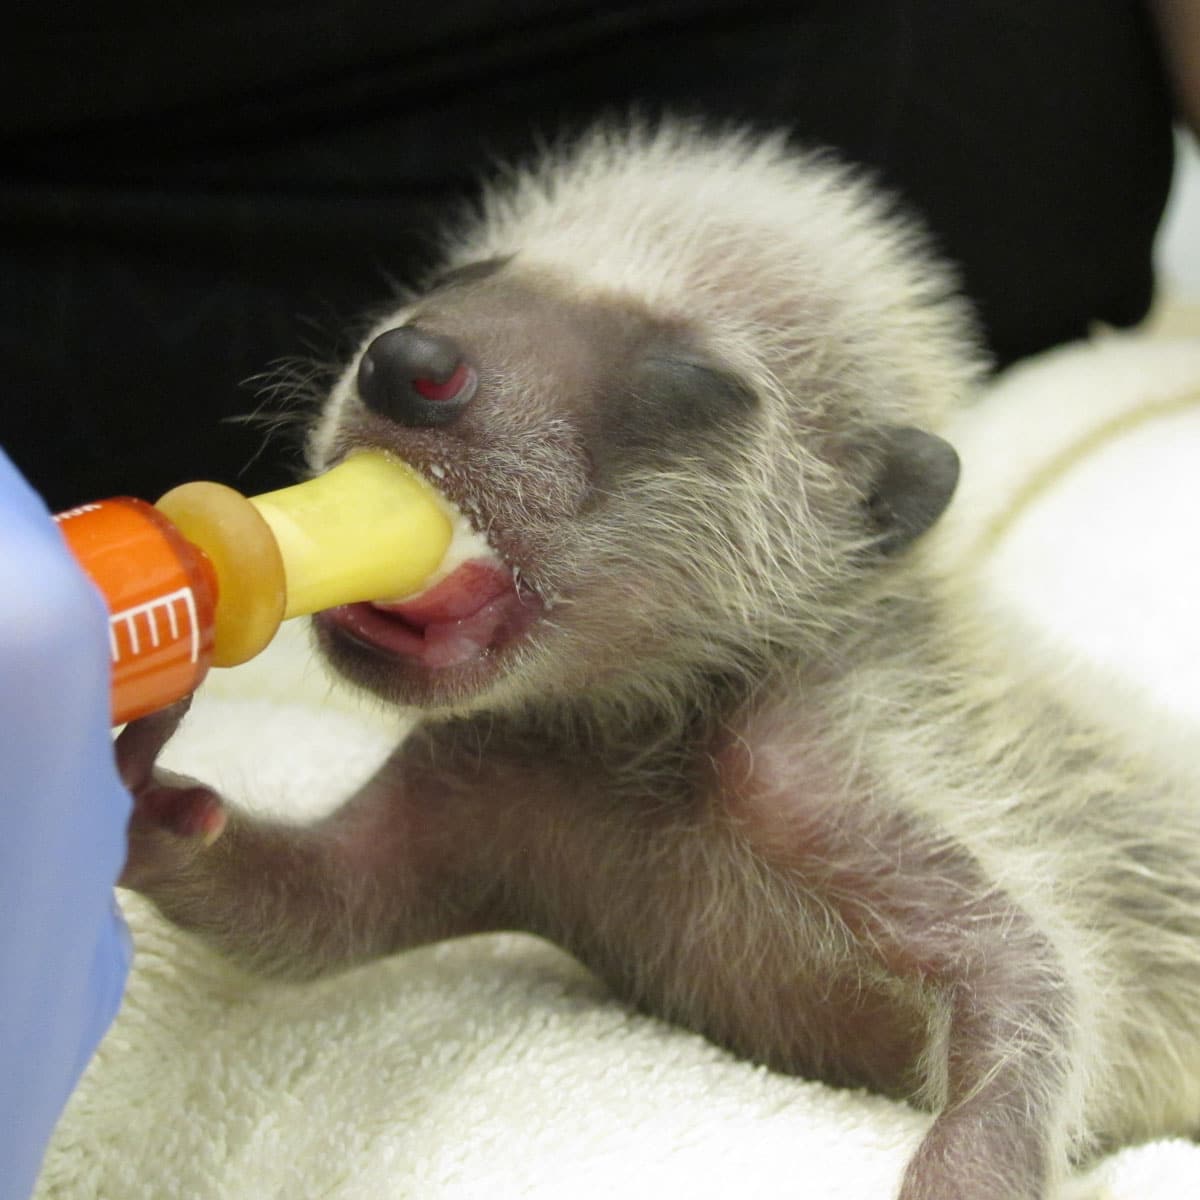 Orphaned baby raccoon at WildCare. Photo by Alison Hermance